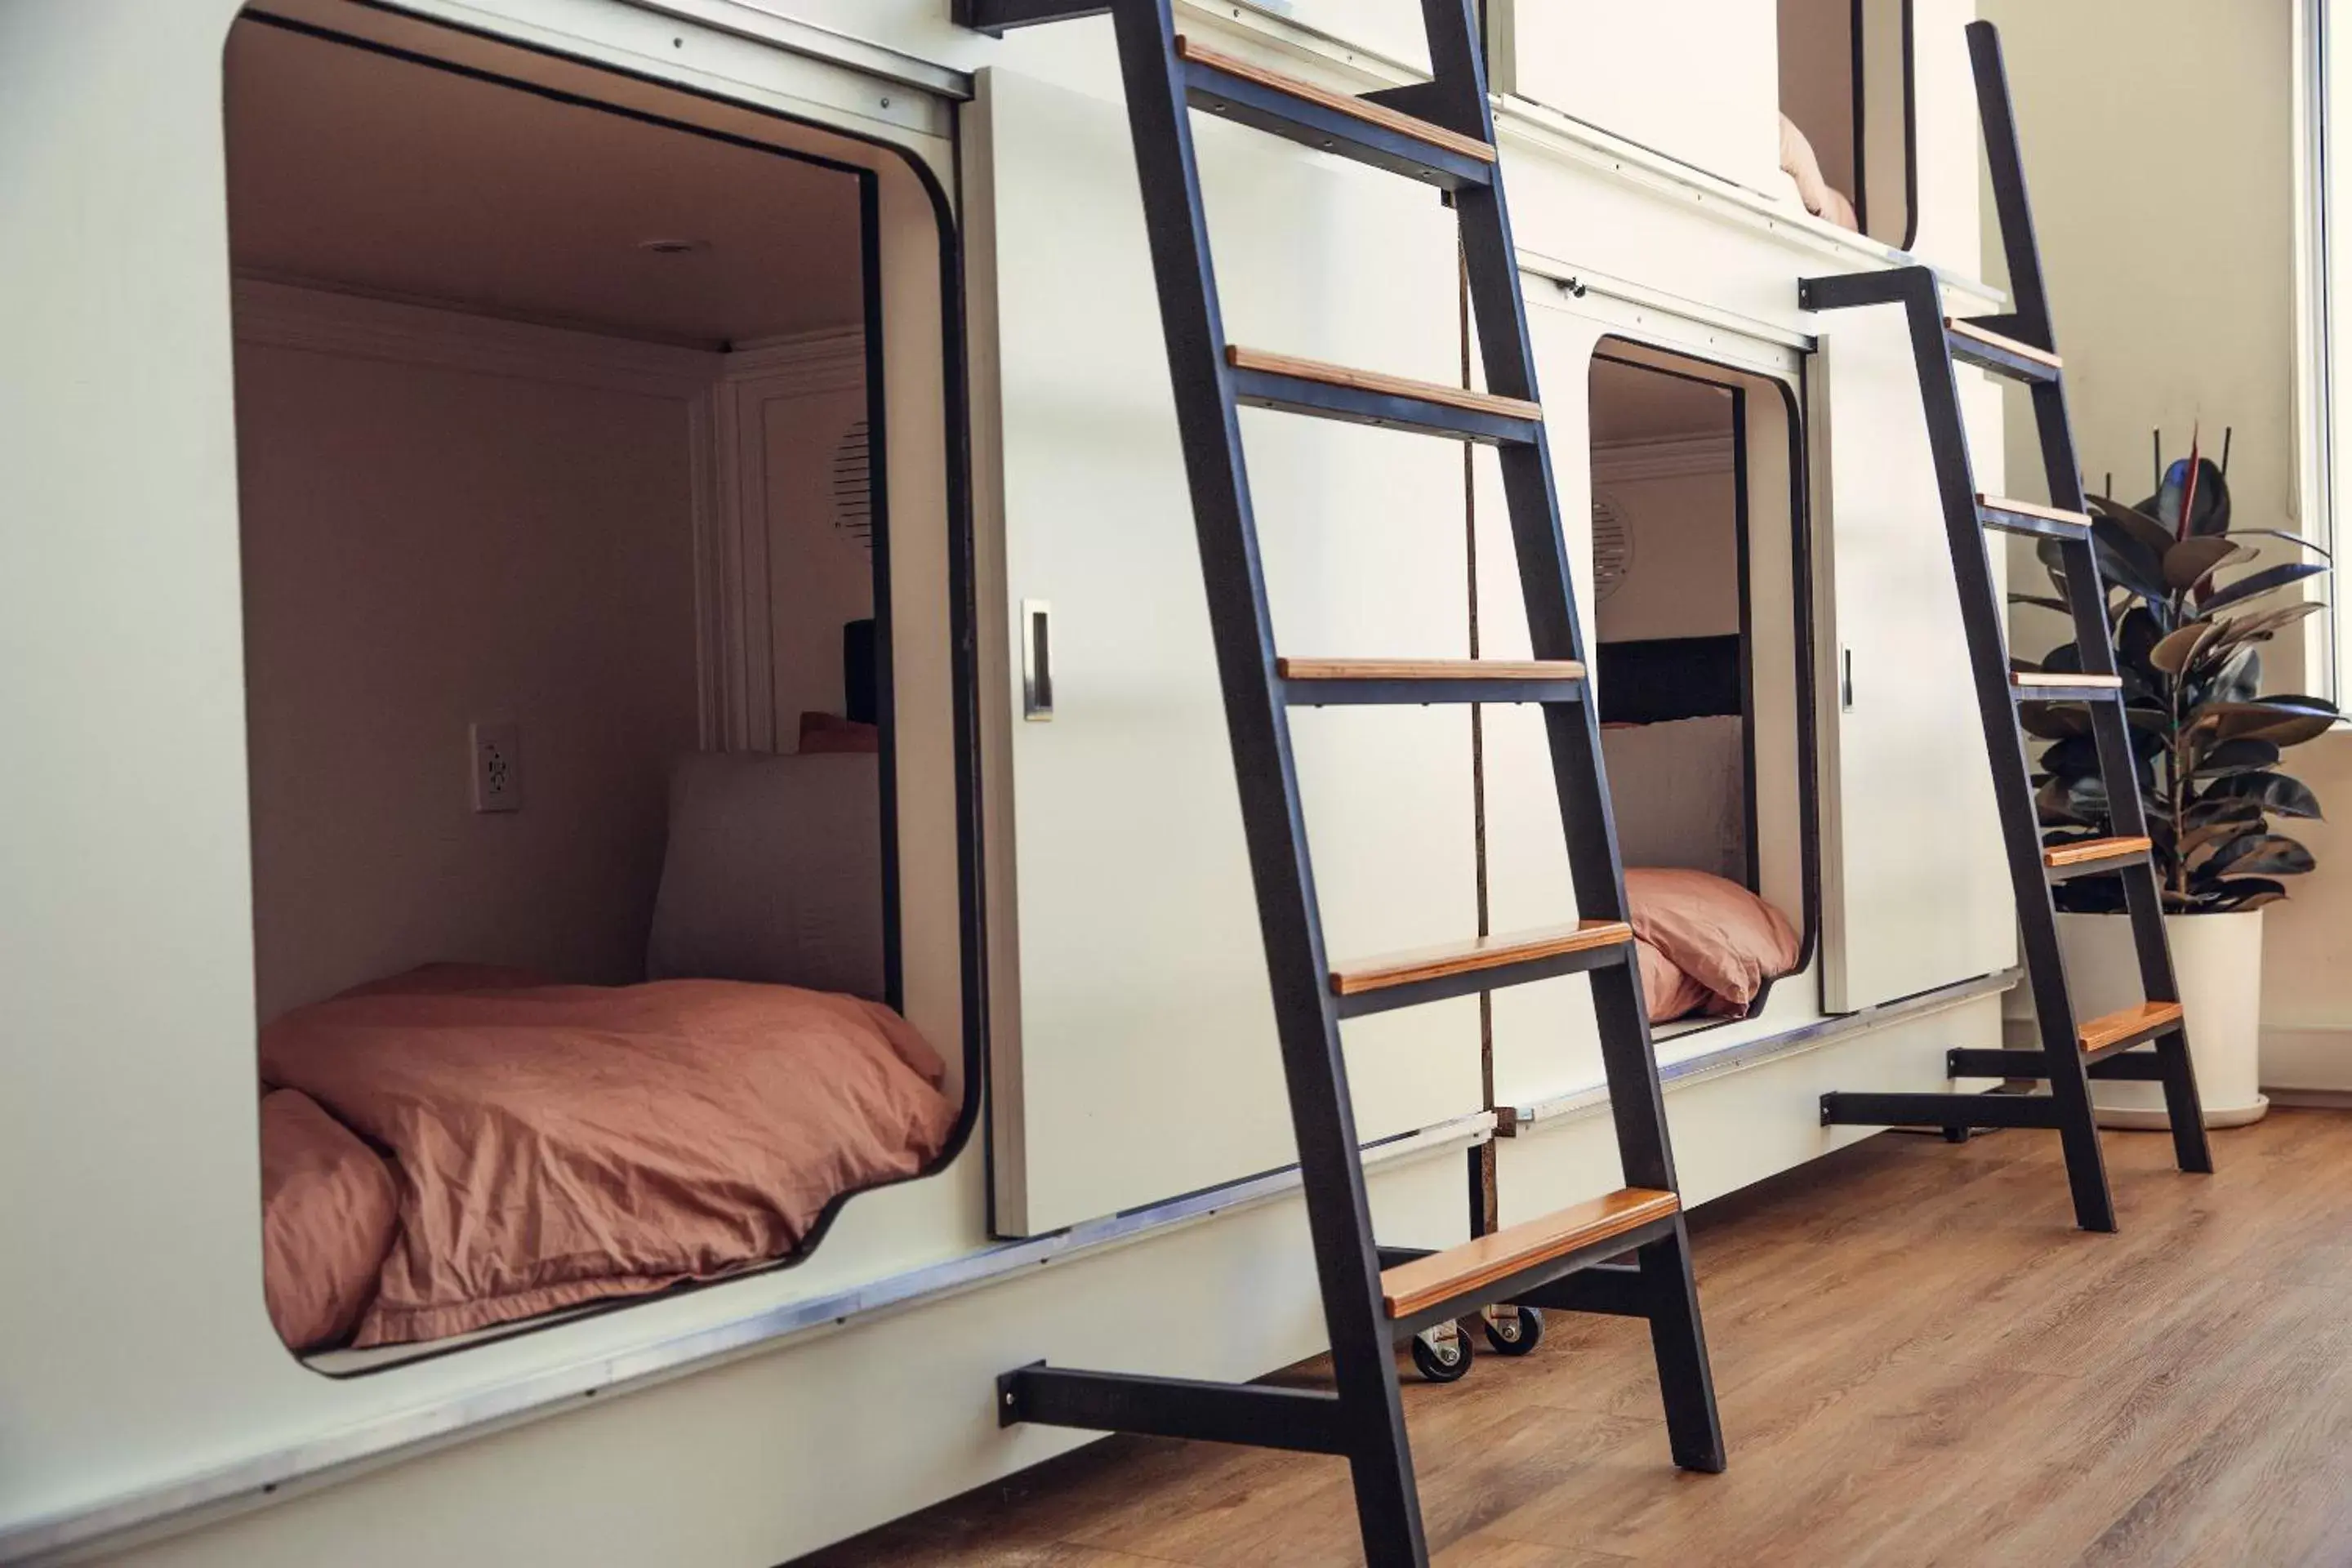 bunk bed in STAY OPEN Venice Beach